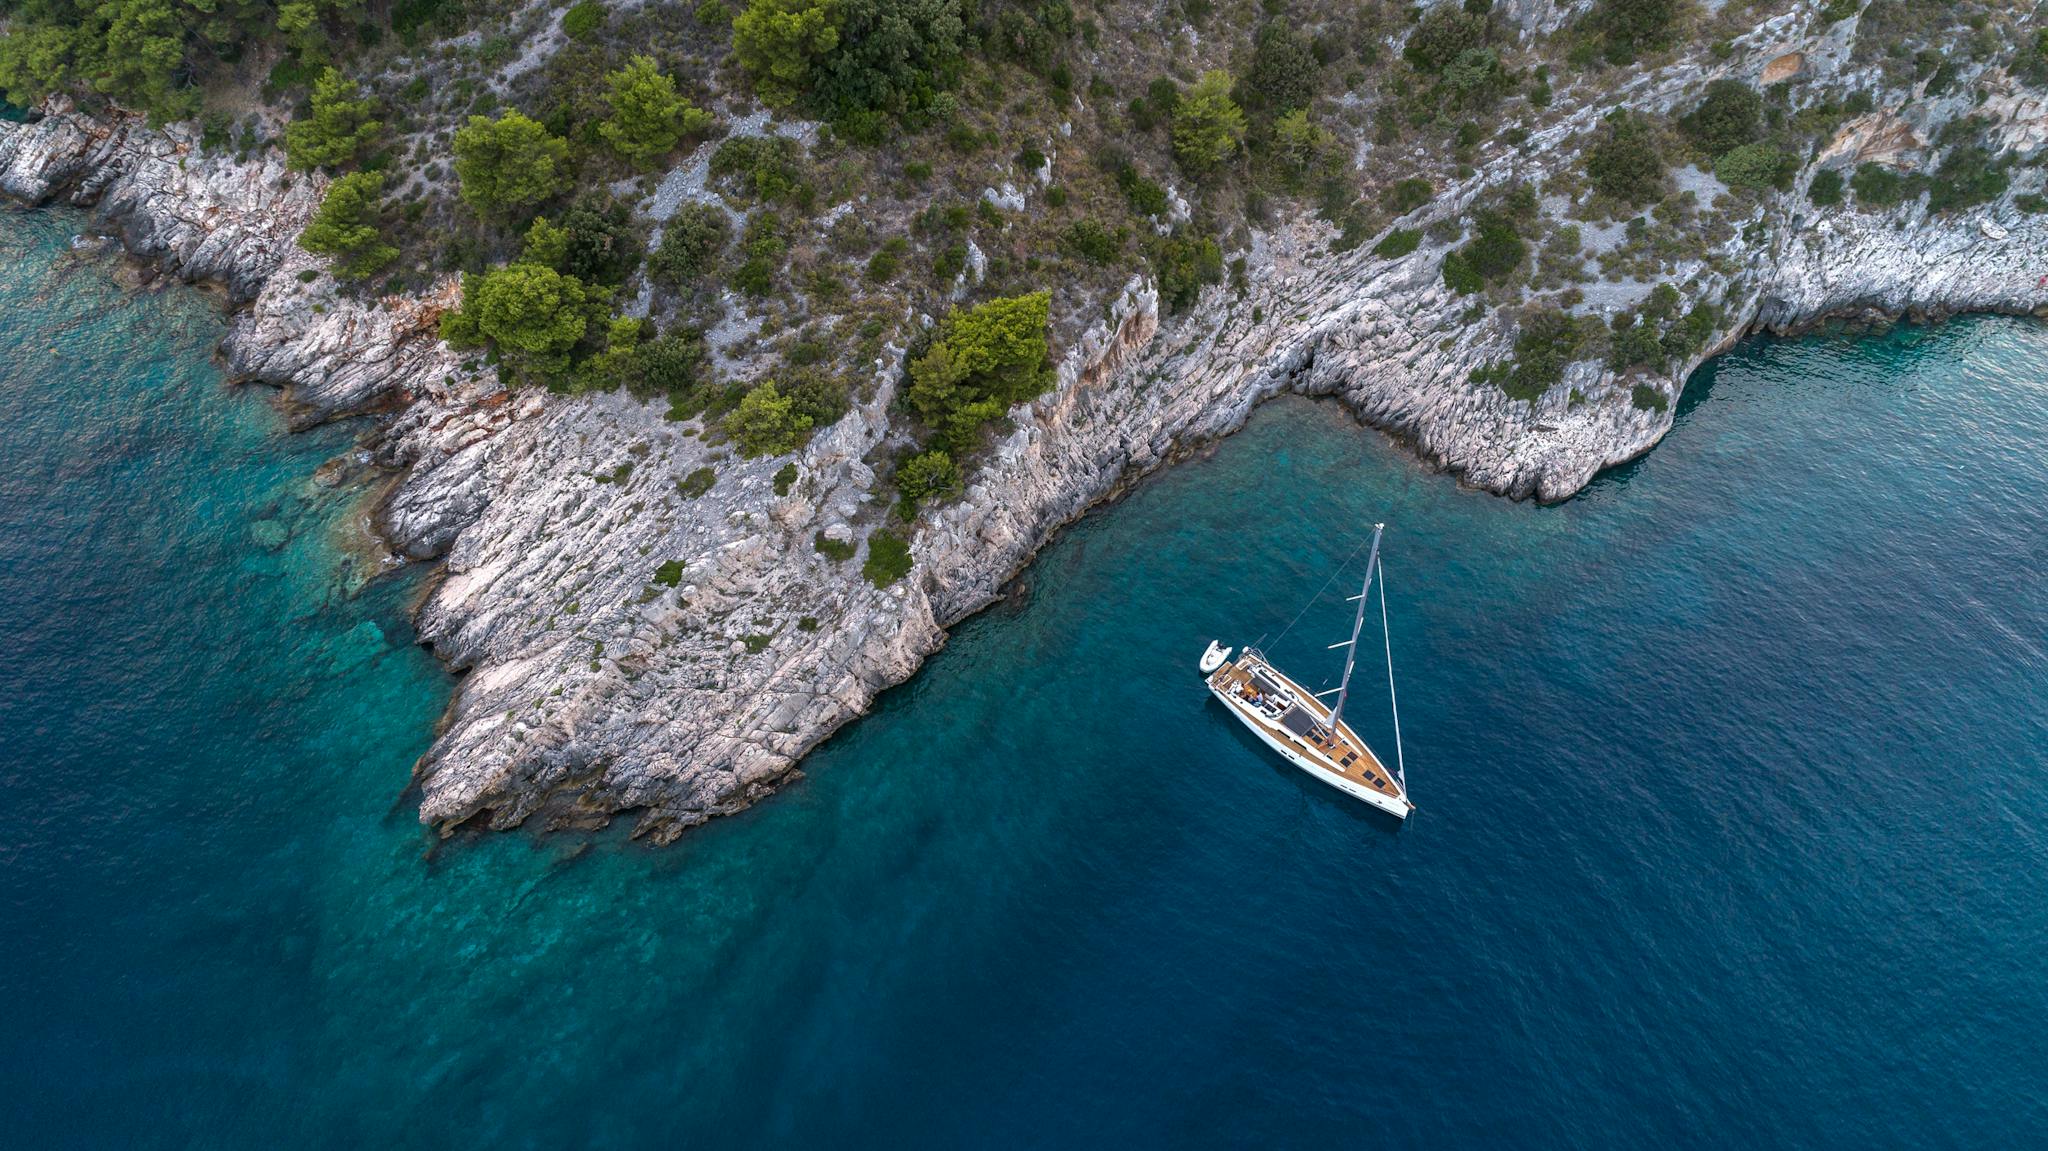 Aerial view of a sailboat sailing in a calm bay, with mountains in the distance.